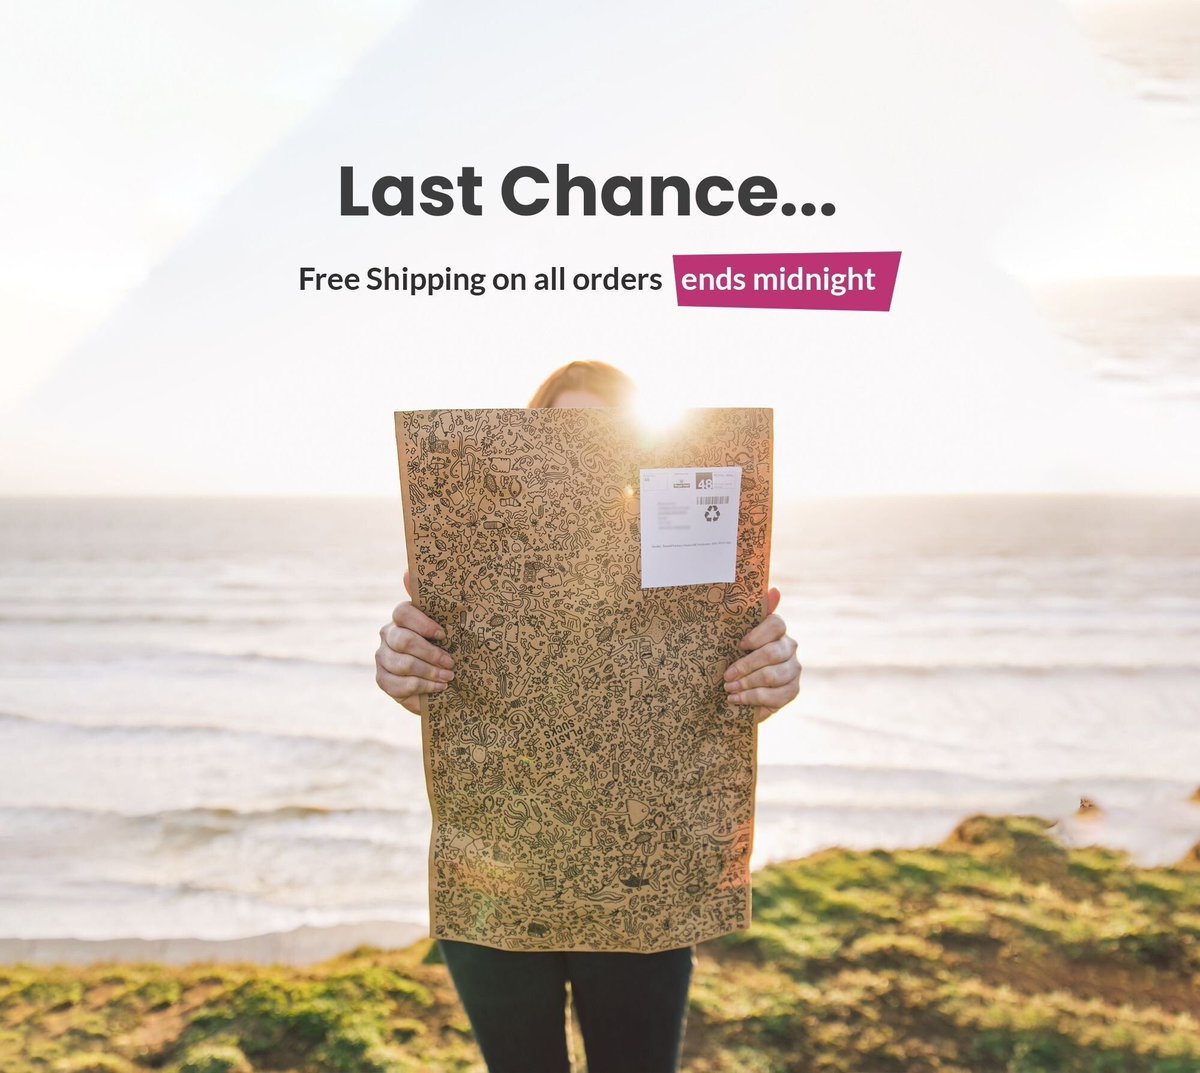 ***LAST CHANCE*** Freepost* ends at midnight tonight (BST). Get yours while you still can! *UK only. Concessions for International customers. @long_covid @65for65 #LongCovid #CureLongCovid